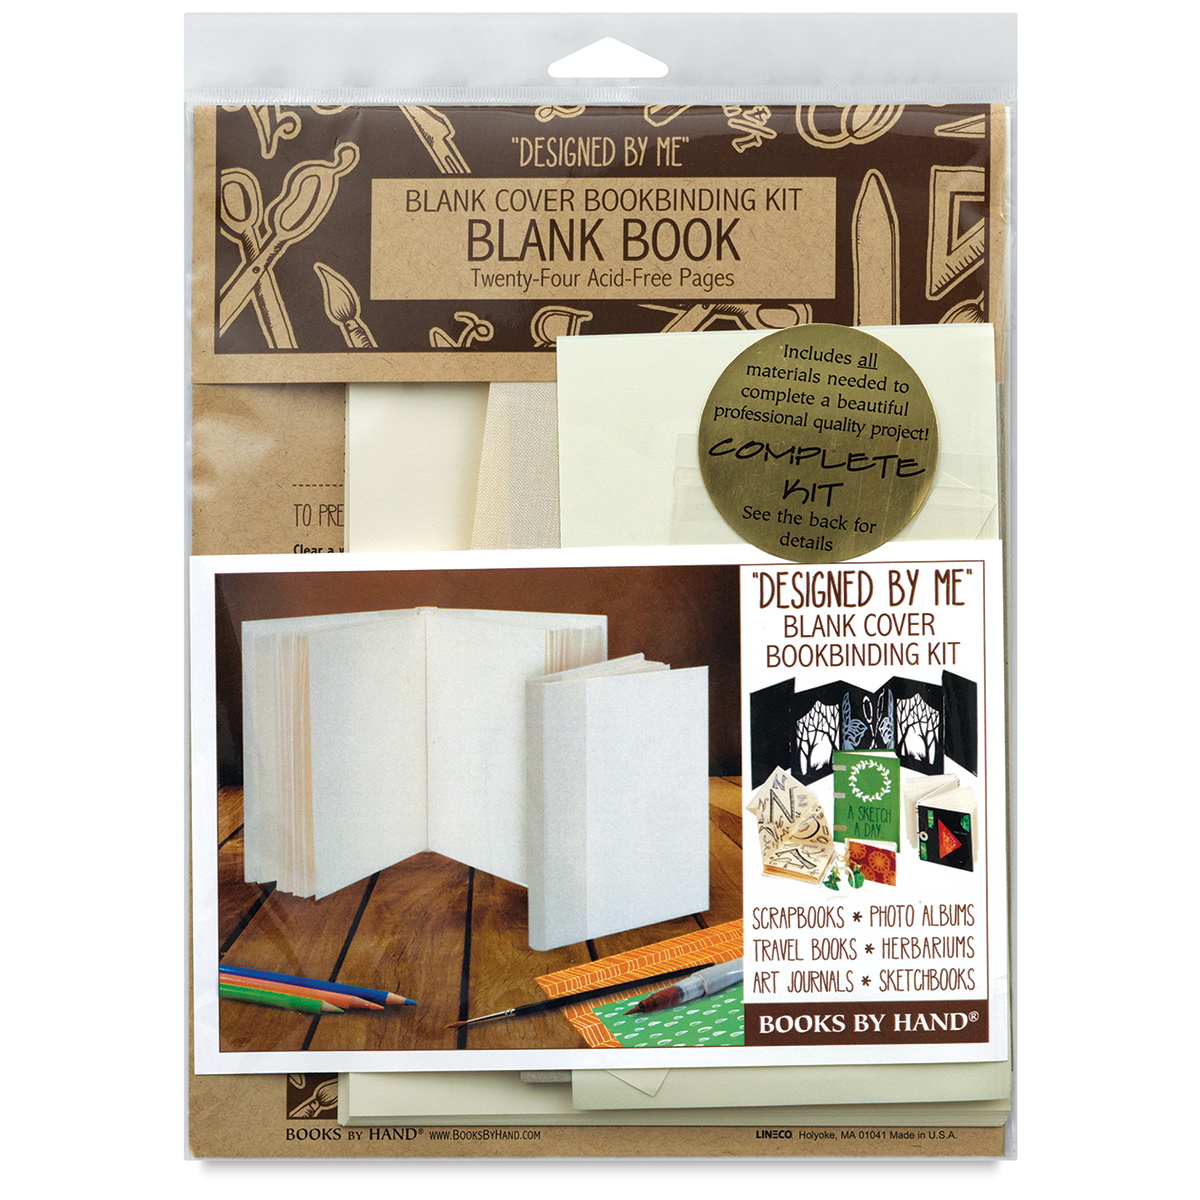 Books by Hand Designed by Me Blank Cover Bookbinding Kit Guest Book, Ivory 7x10.5